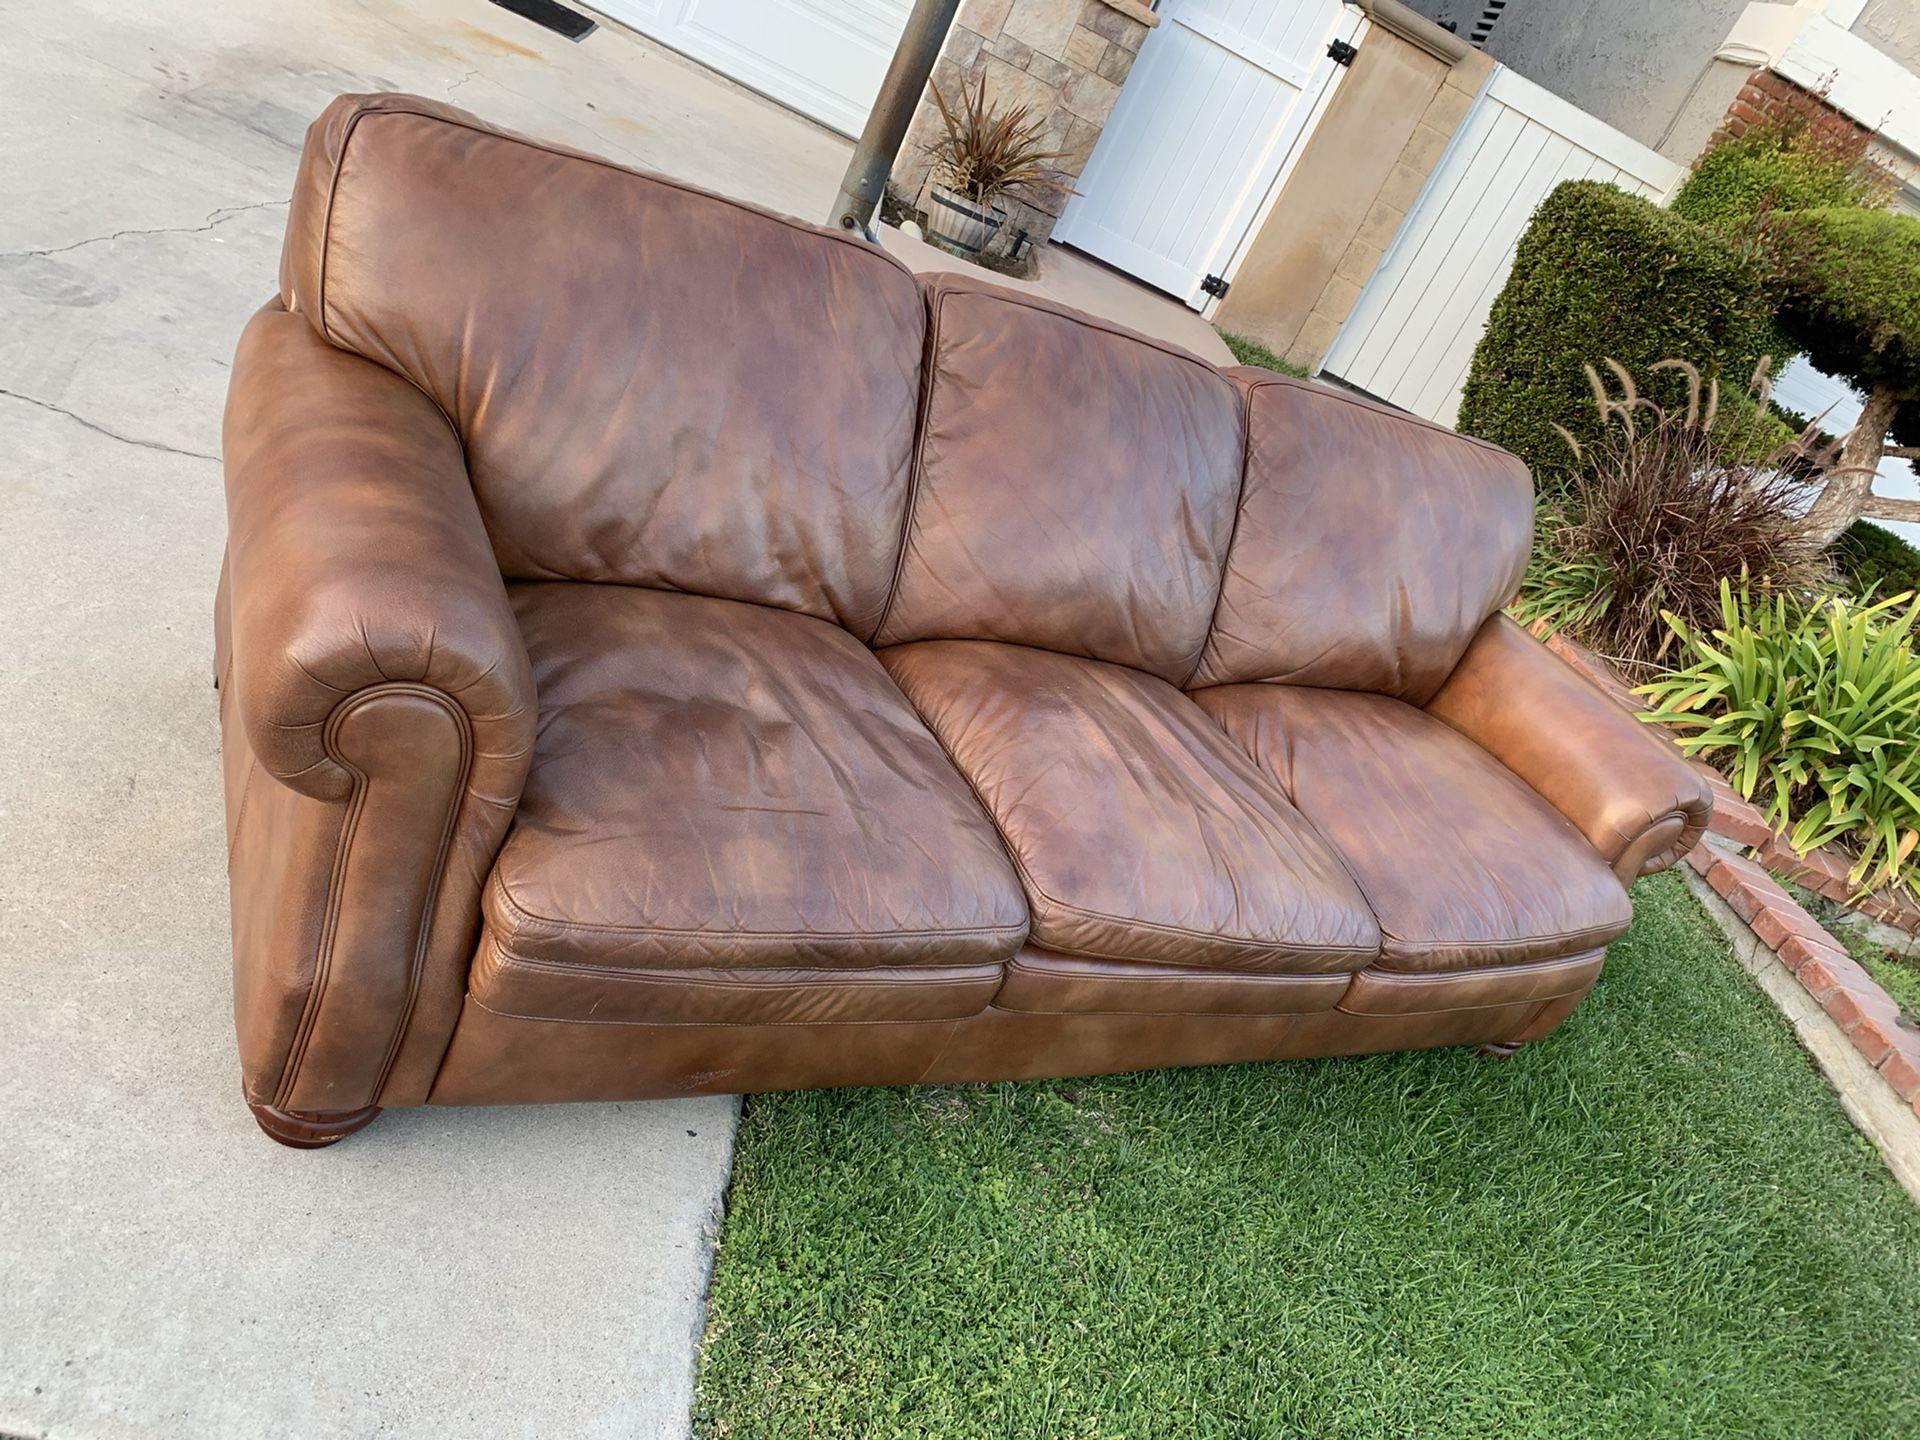 FREE LEATHER COUCH